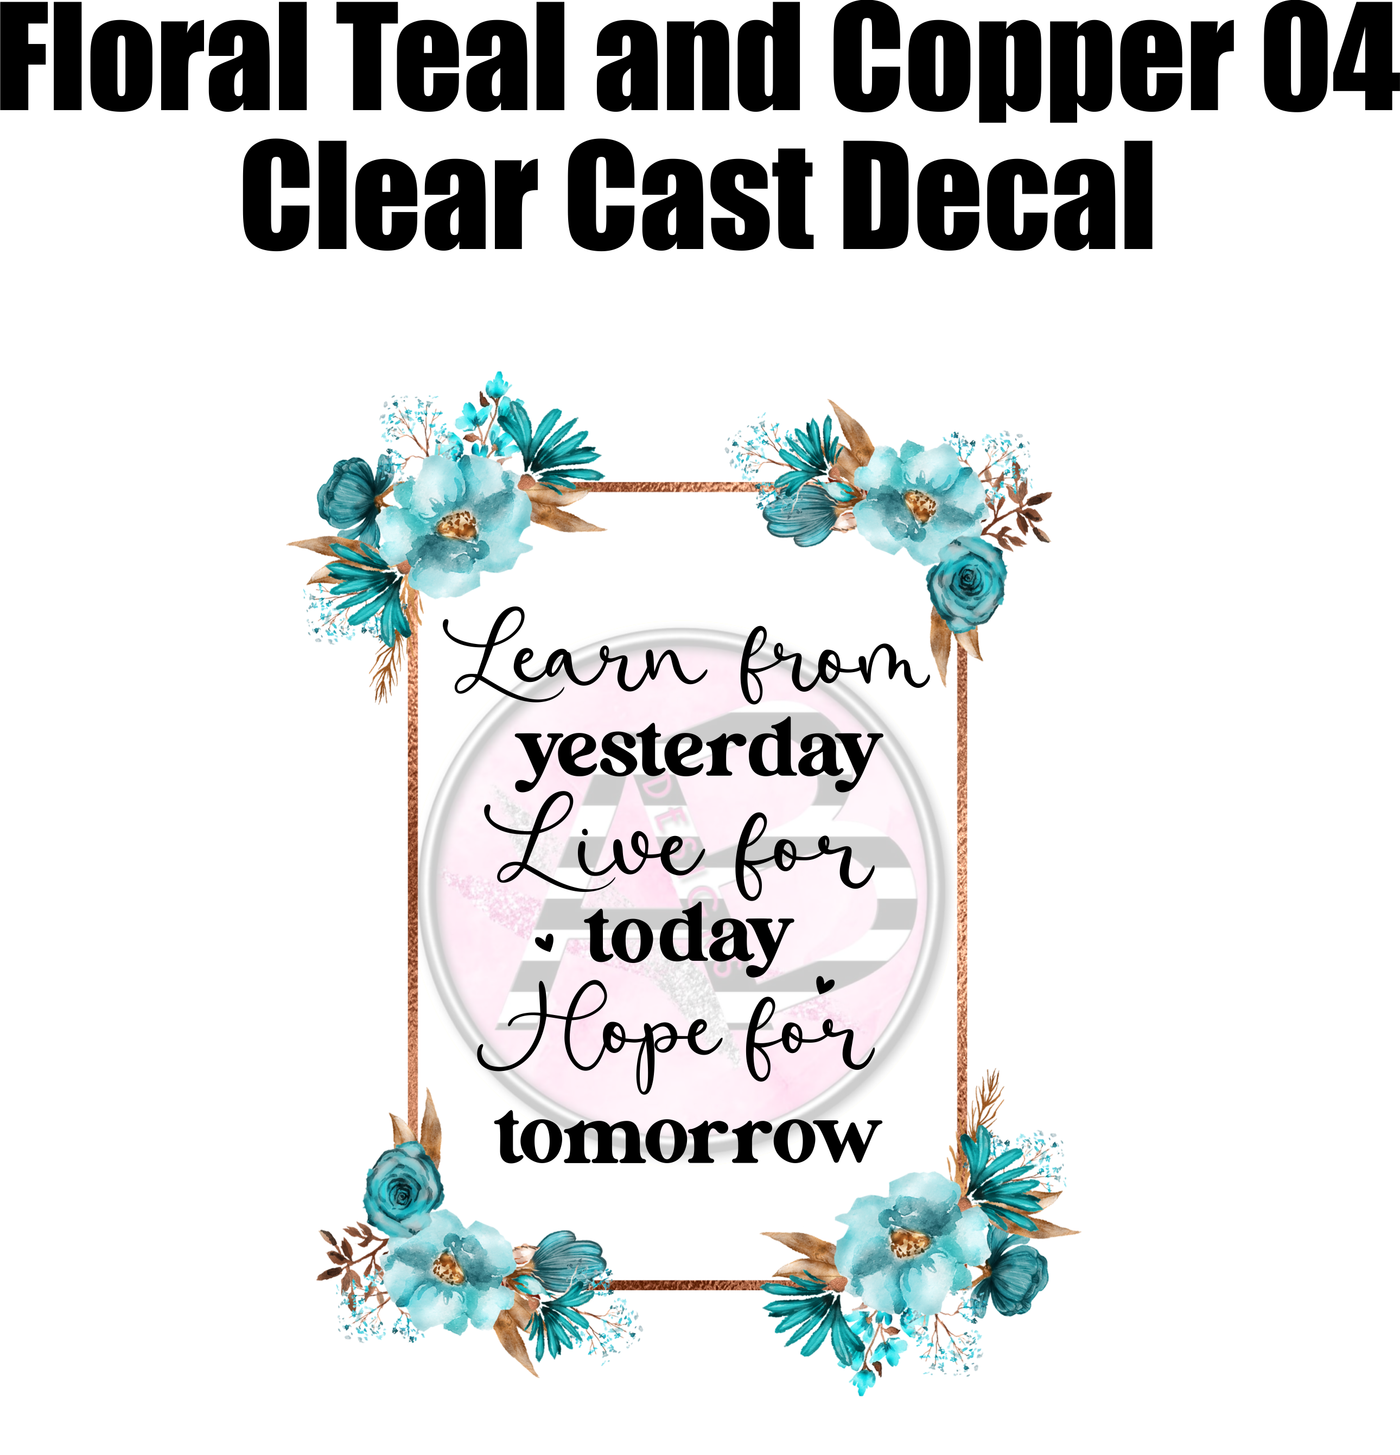 Floral Teal and Copper 04 - Clear Cast Decal